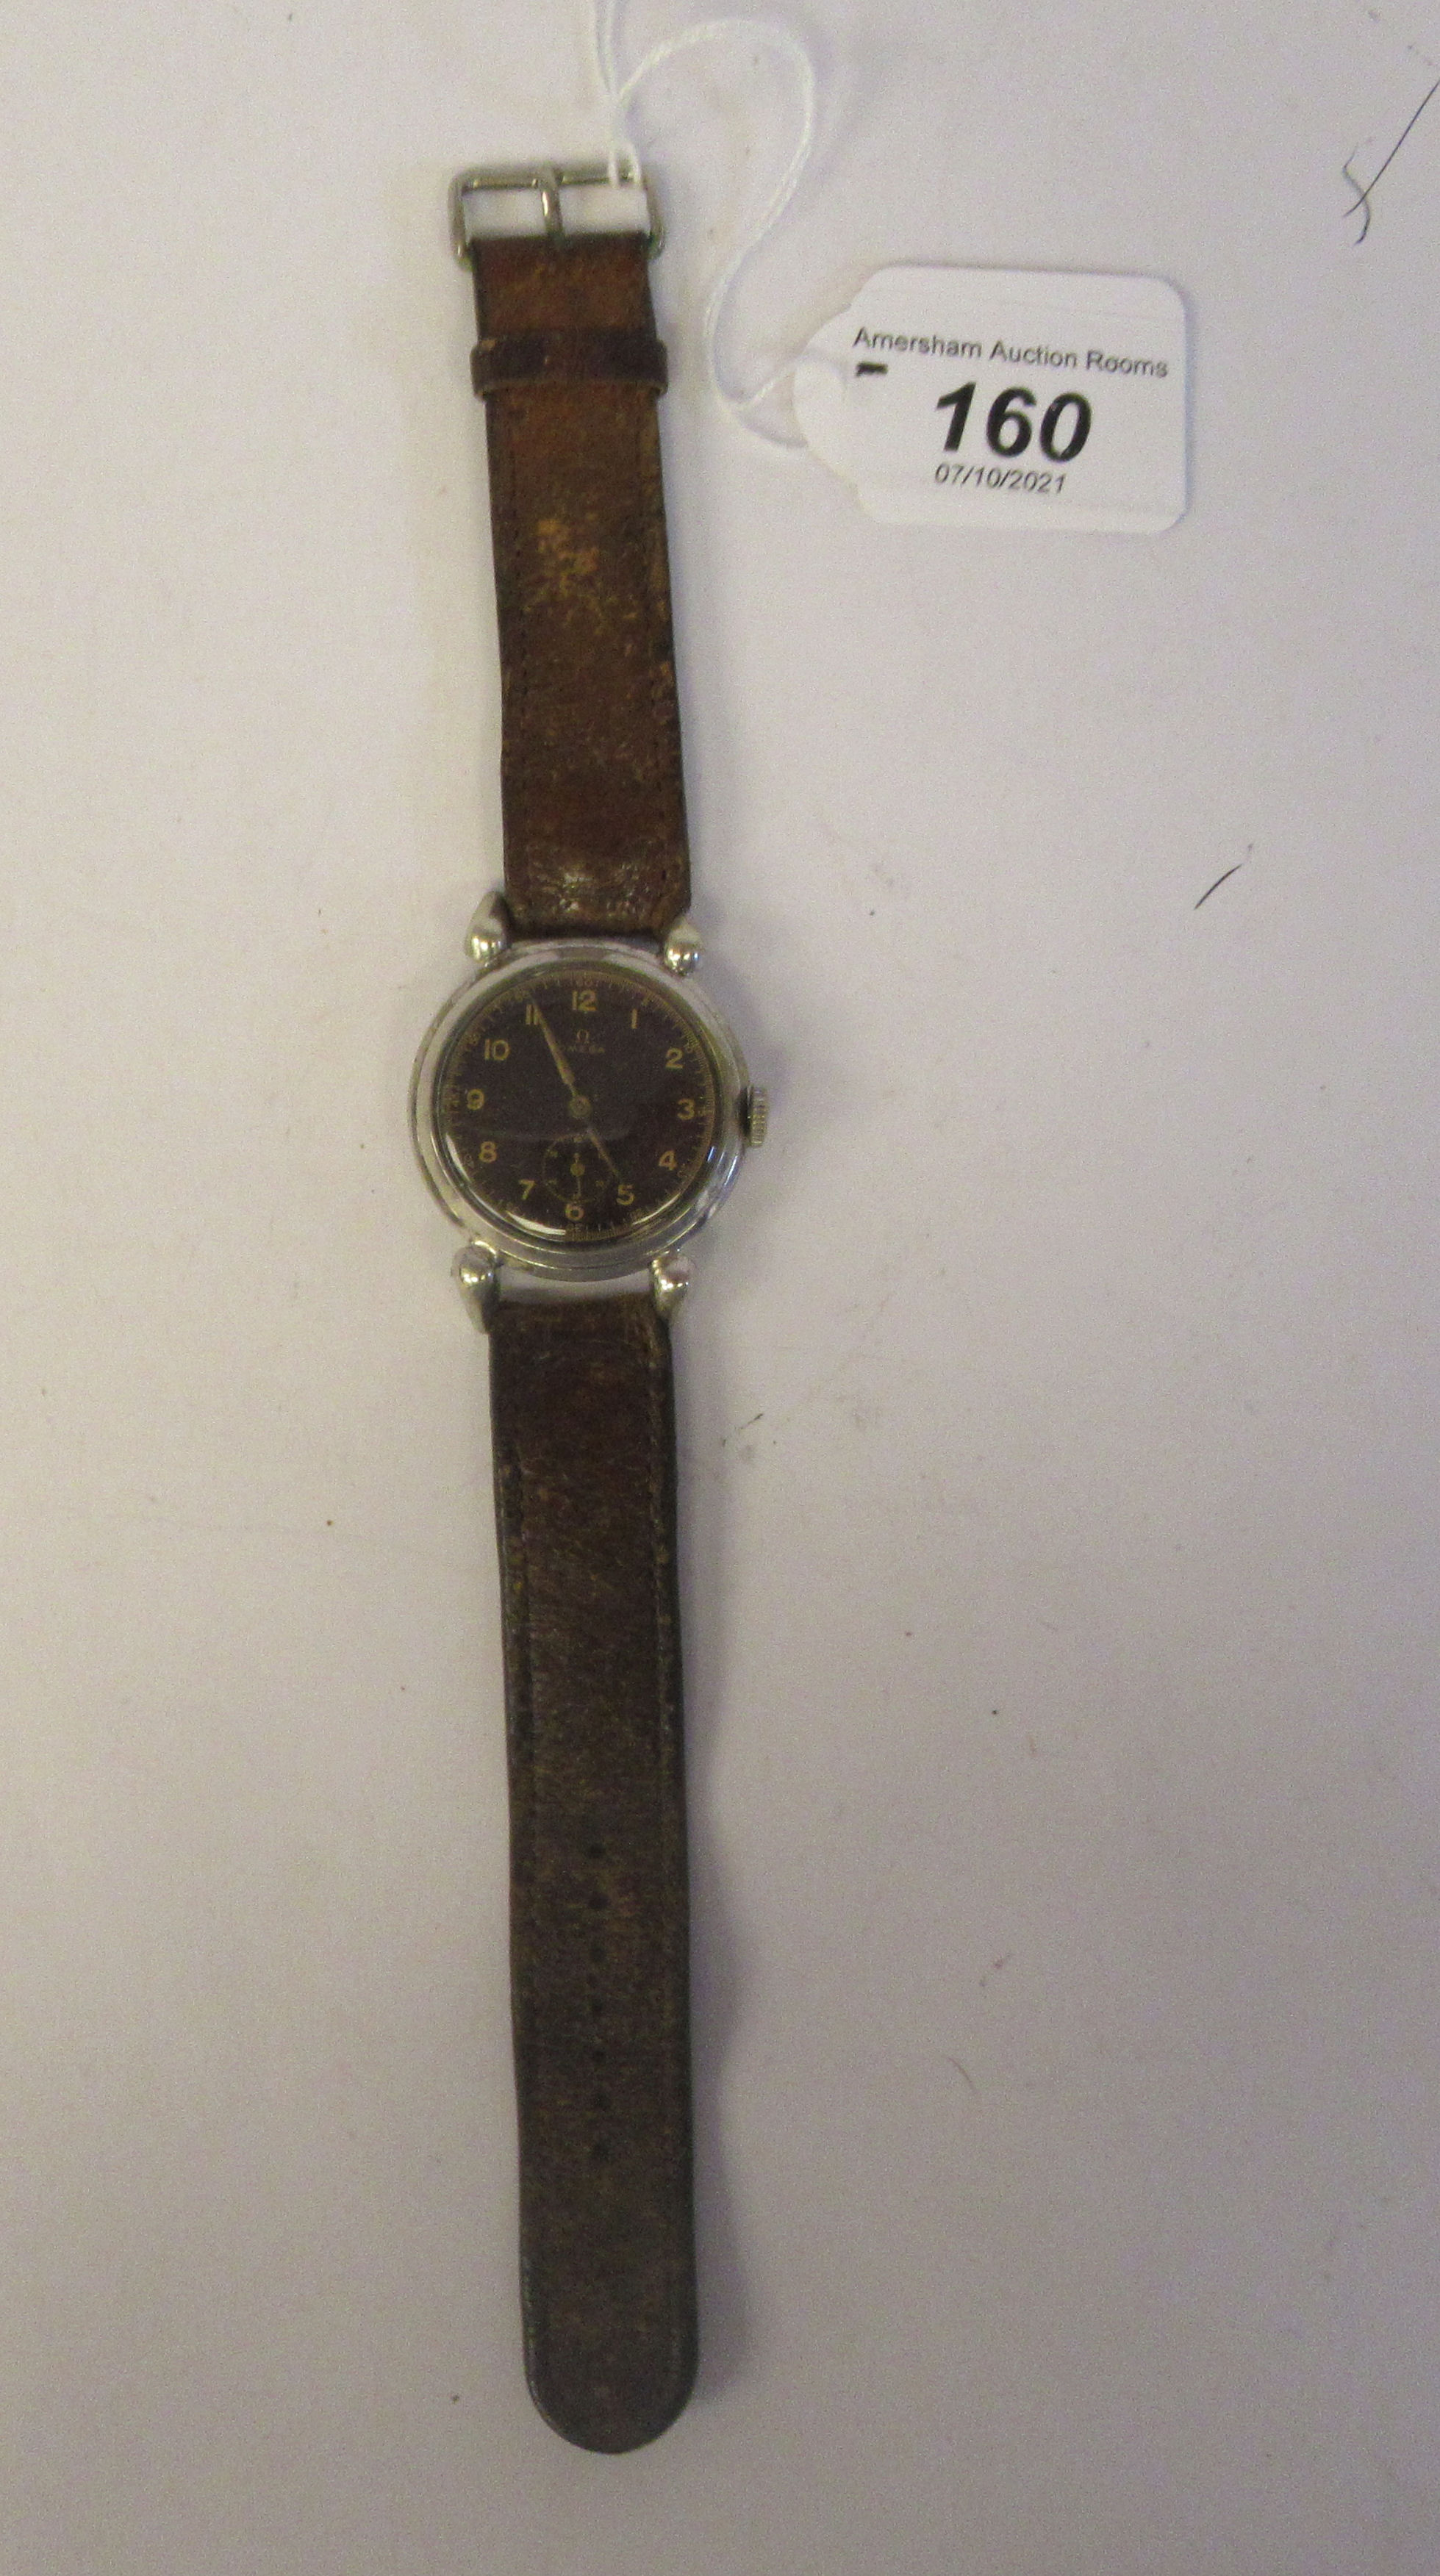 A 1933 Omega chromium plated crab cased wristwatch, faced by a black Arabic dial, incorporating - Image 2 of 4